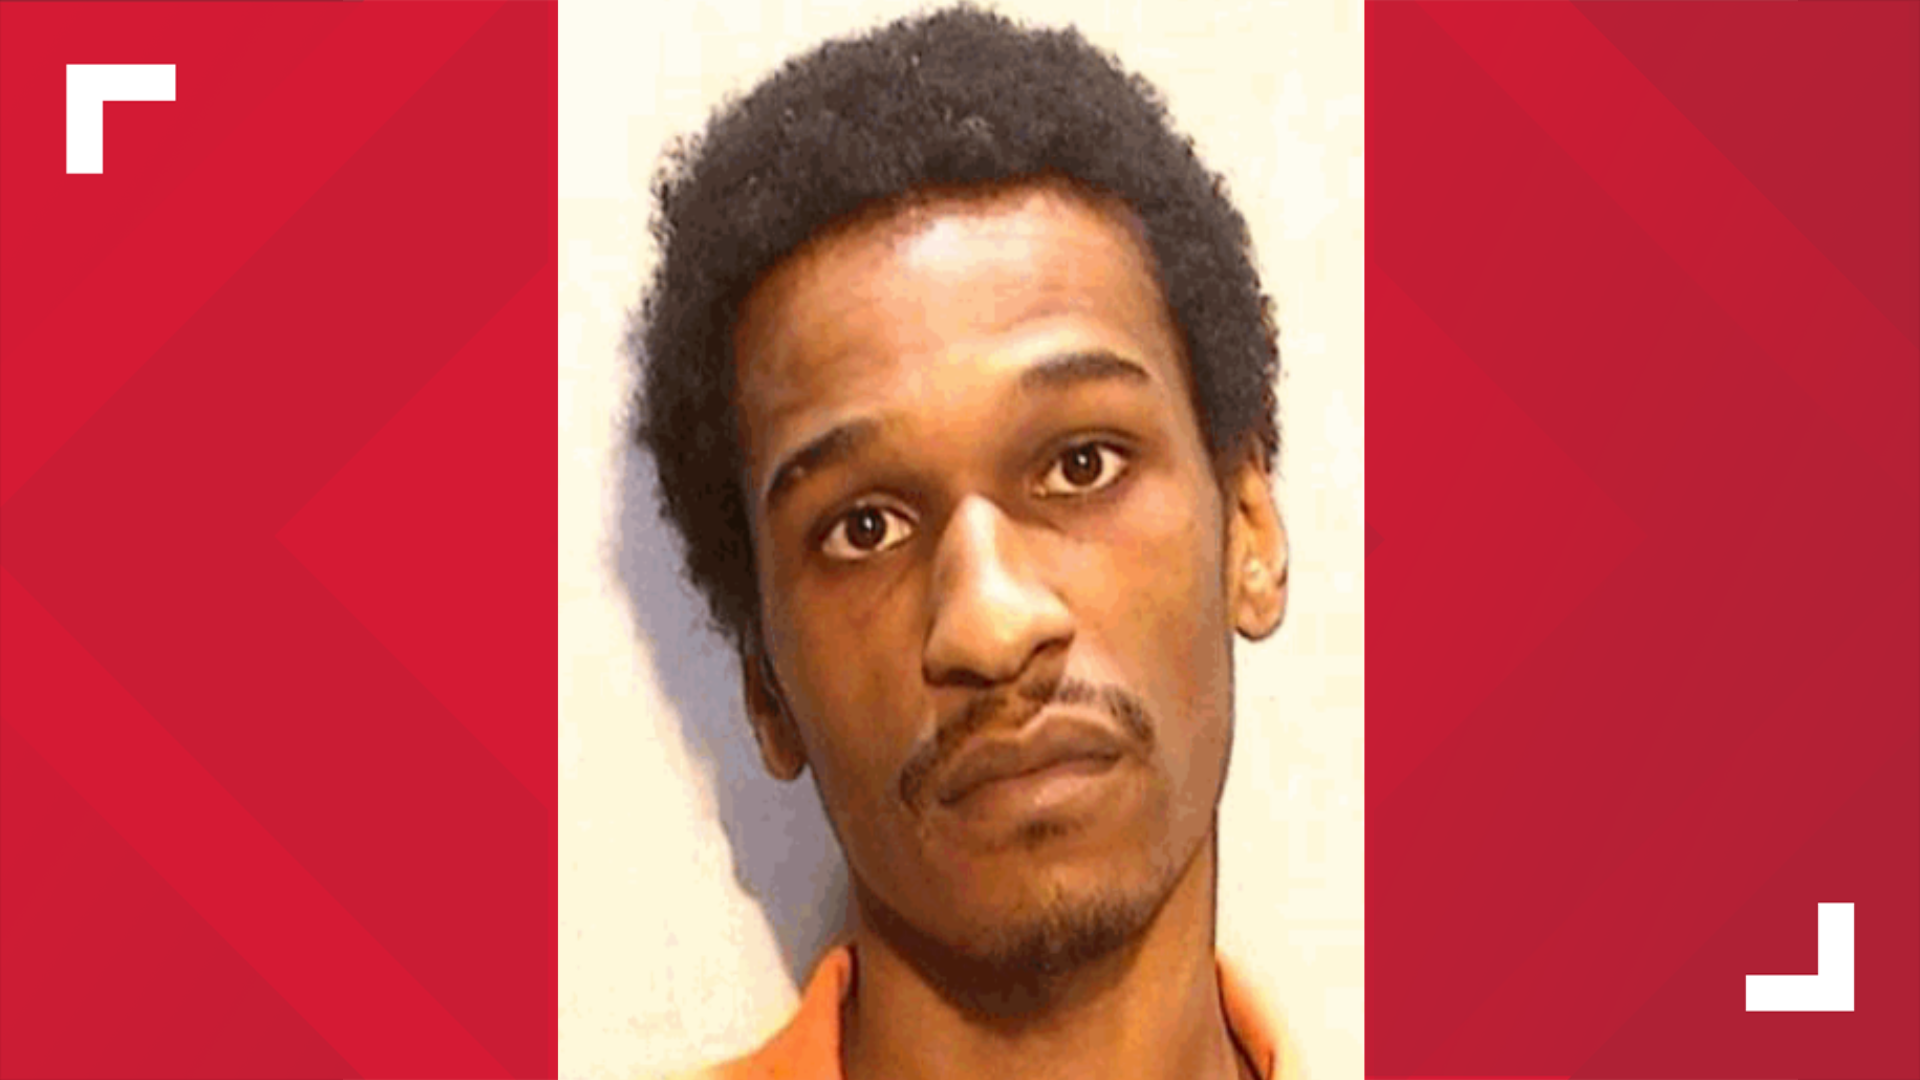 An investigation by TPD led to the arrest of Derrick Perkins. Perkins allegedly committed a fifth robbery following the same pattern as the others over the weekend.